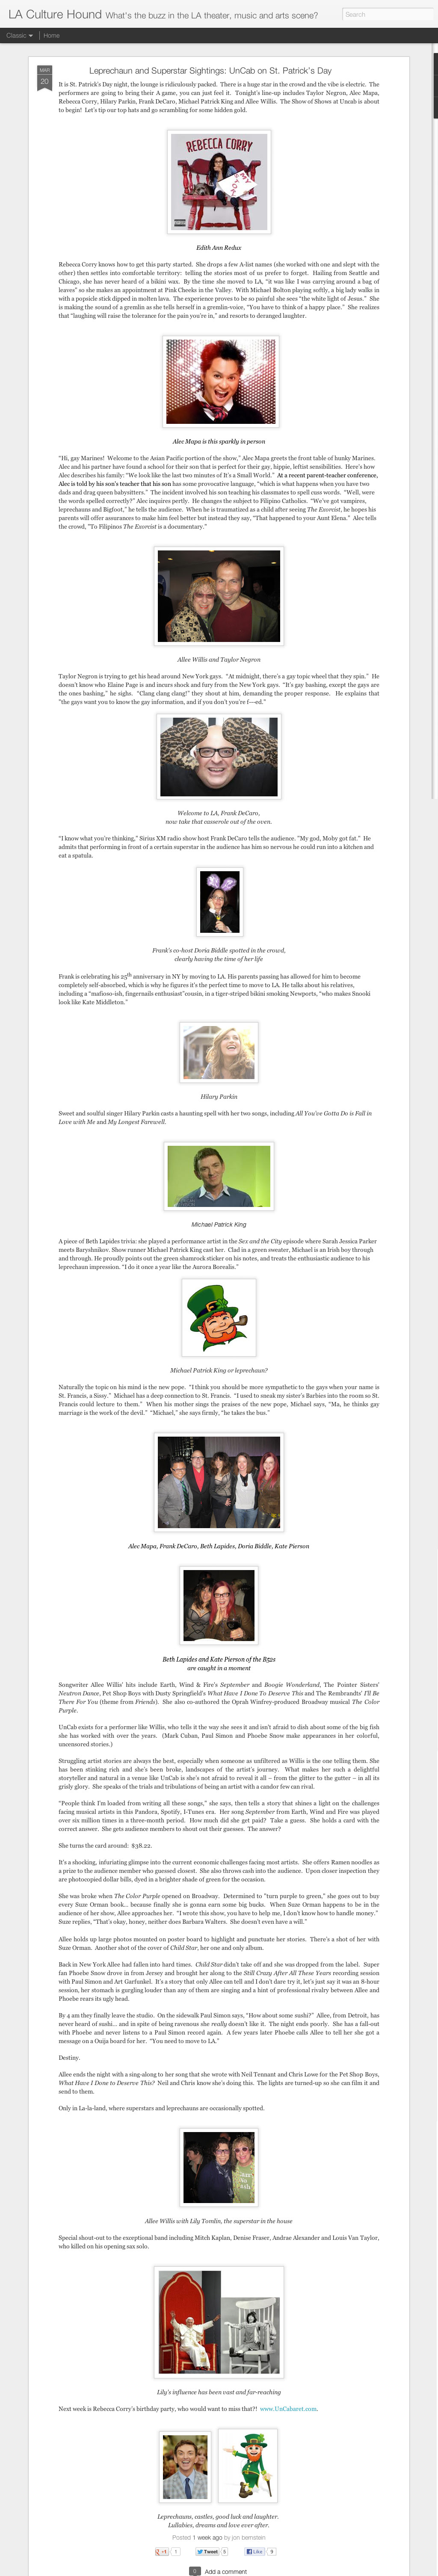 Leprechaun and Superstar Sightings: UnCab on St. Patrick's Day, (LA Culture Hound, March 20, 2013)